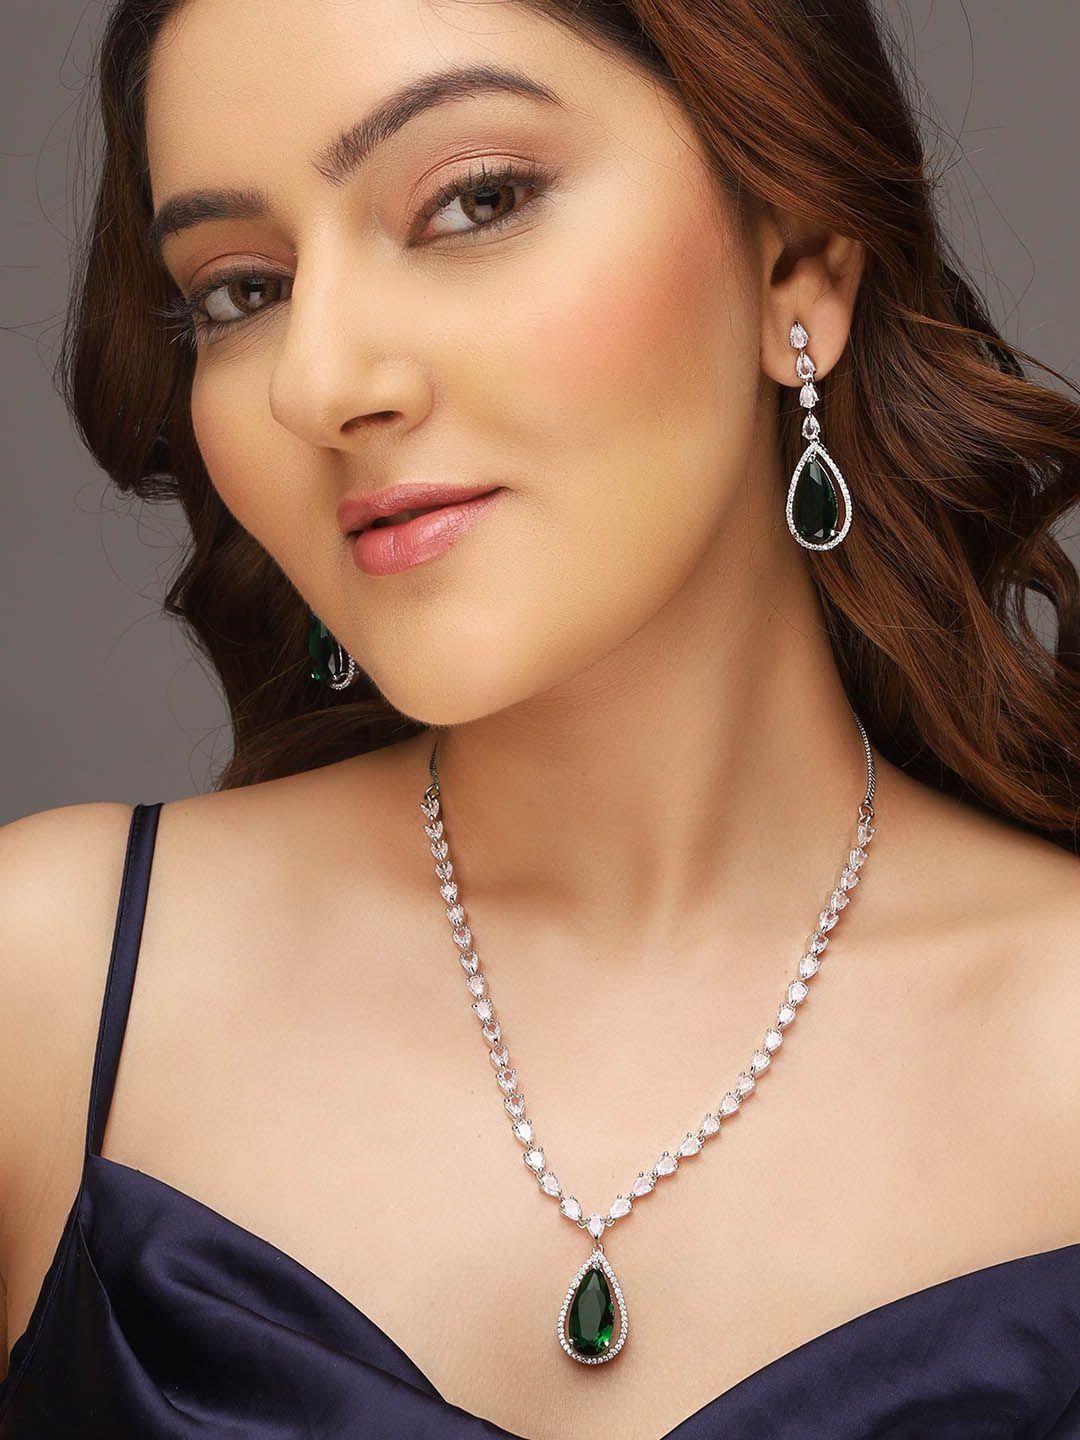 aquastreet silver-plated ad-studded necklace & earrings